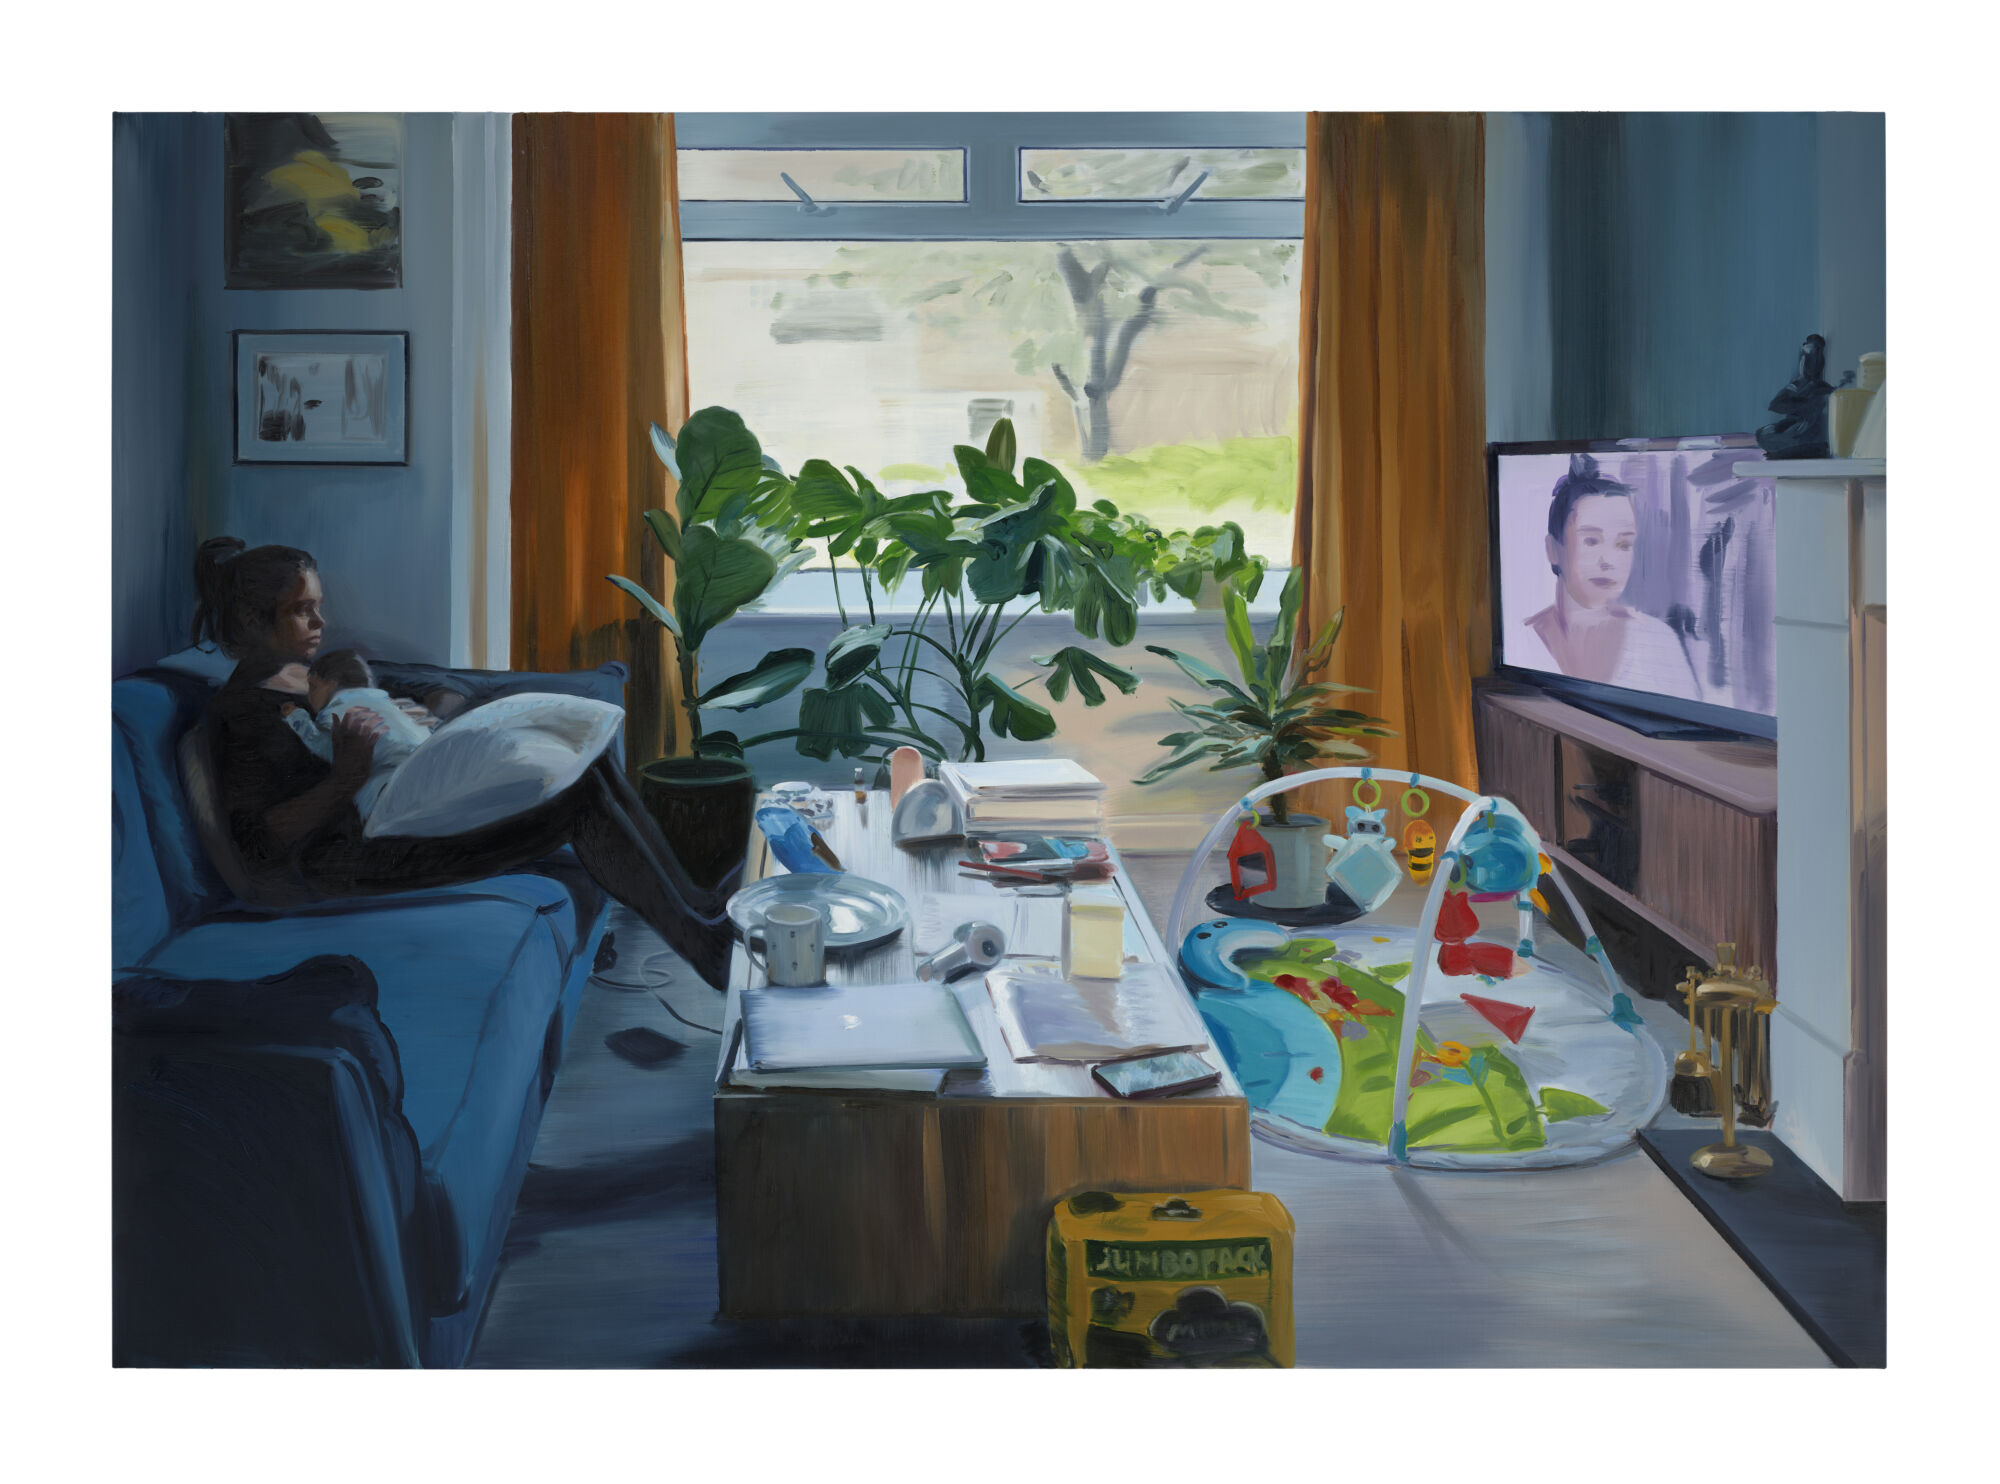 The Wick - Caroline Walker, 'Married at First Sight', 2022. Oil
on linen, 180 x 255cm (70 7/8 x 94 1/2in).
Copyright Caroline Walker. Courtesy the artist and
Stephen Friedman Gallery, London. Photo by Peter
Mallet.